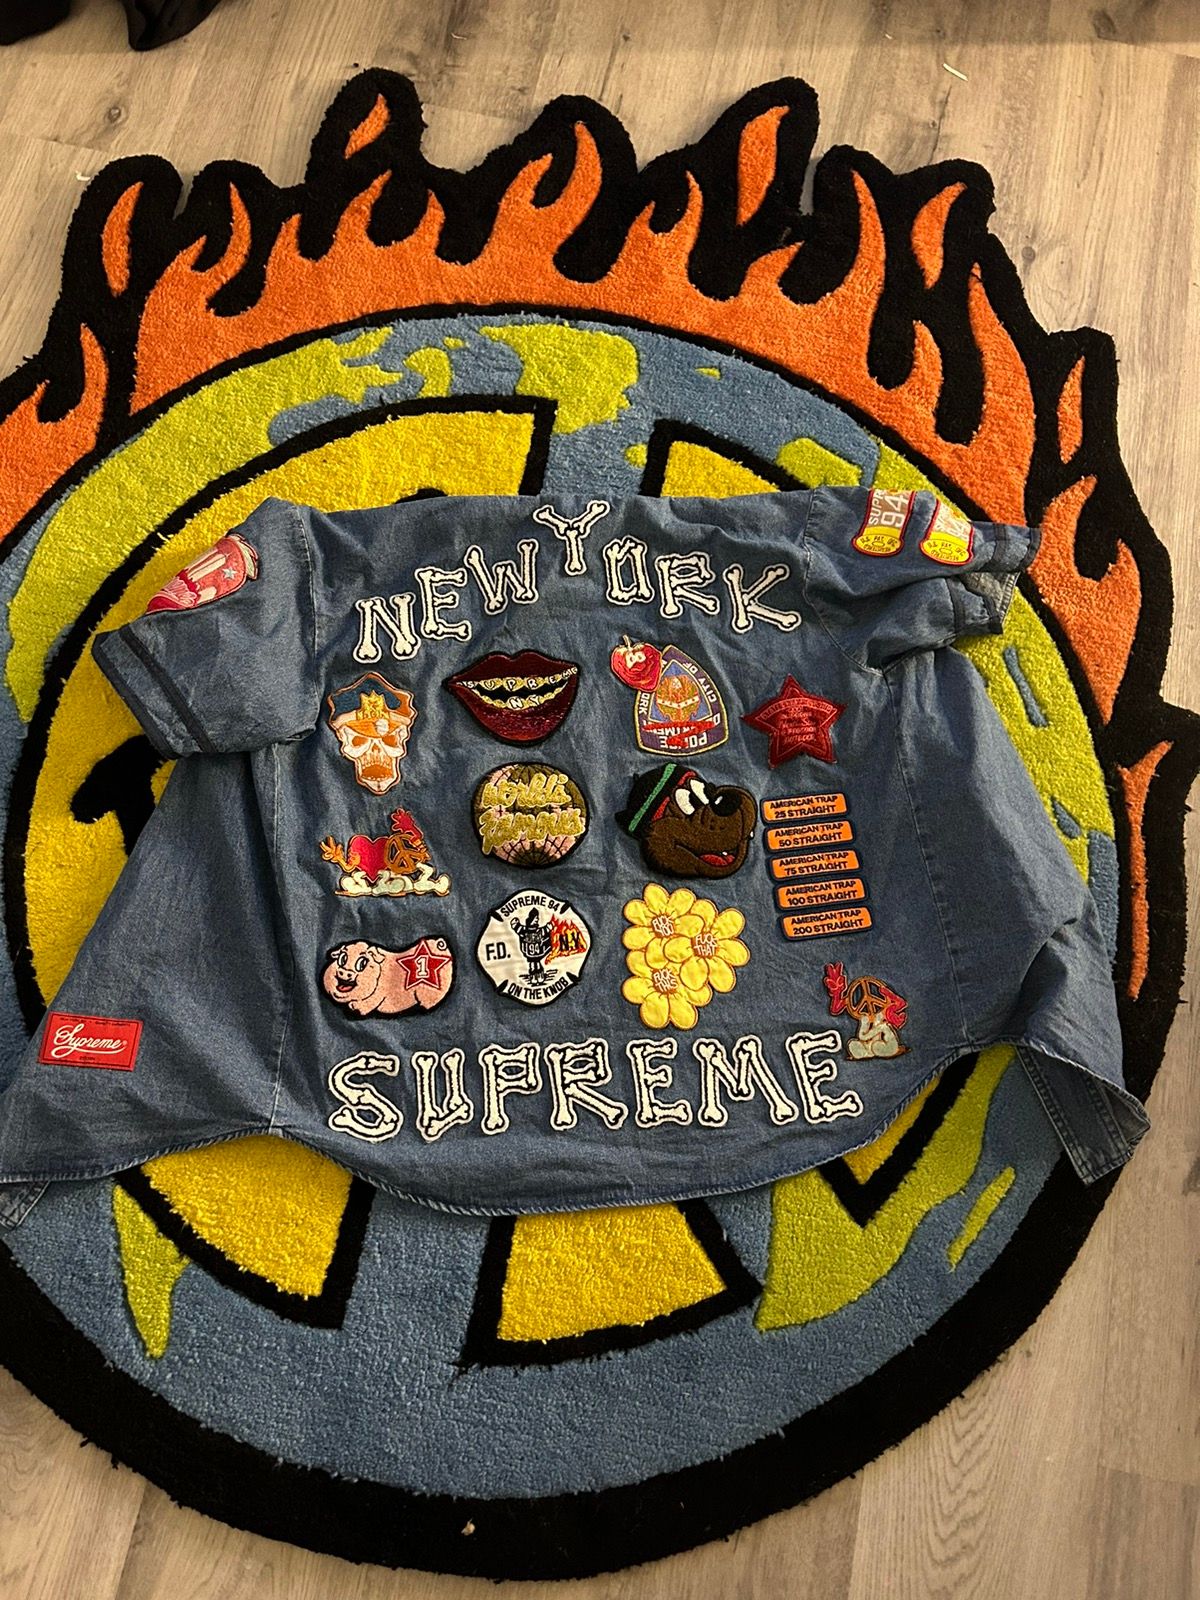 Straight Supreme Patches